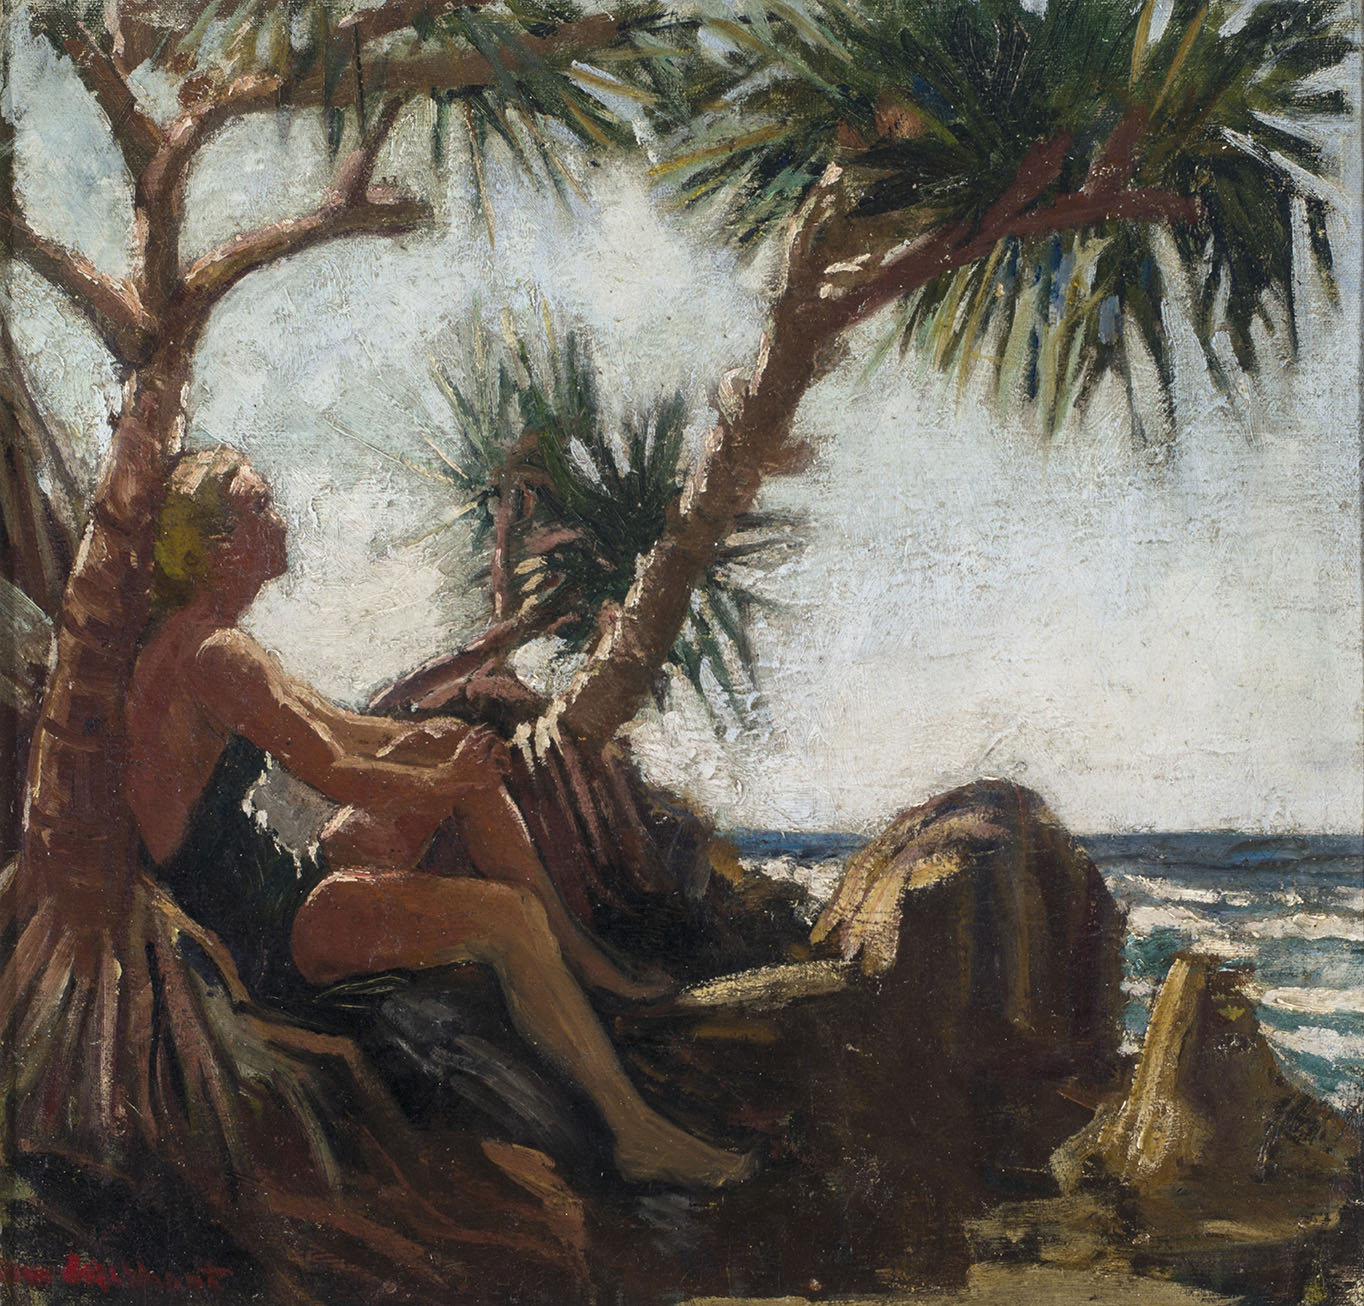 Gwendolyn GRANT, Under the Pandanus tree n.d., oil on canvas board. QUT Art Collection. Donated through the Australian Government's Cultural Gifts Program, 2011.